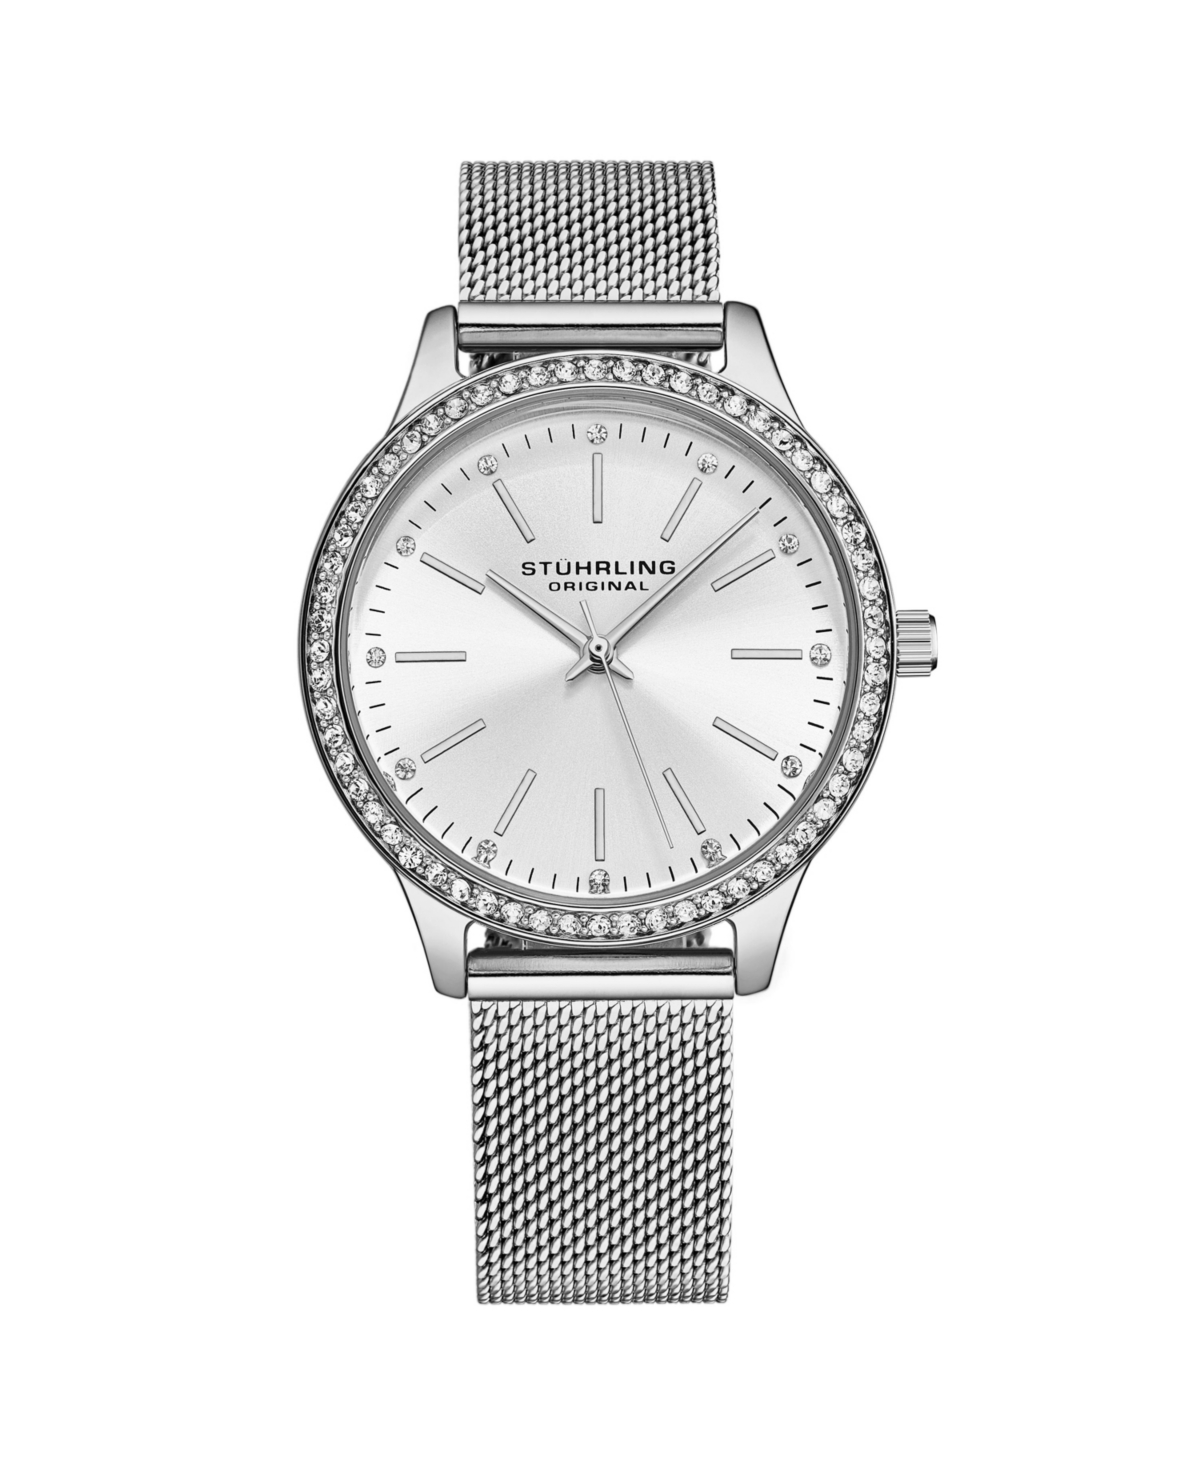 Women's Quartz Crystal Studded SilverCase and Dilver Mesh Bracelet, Silver Hands and Markers Watch - Silver-tone